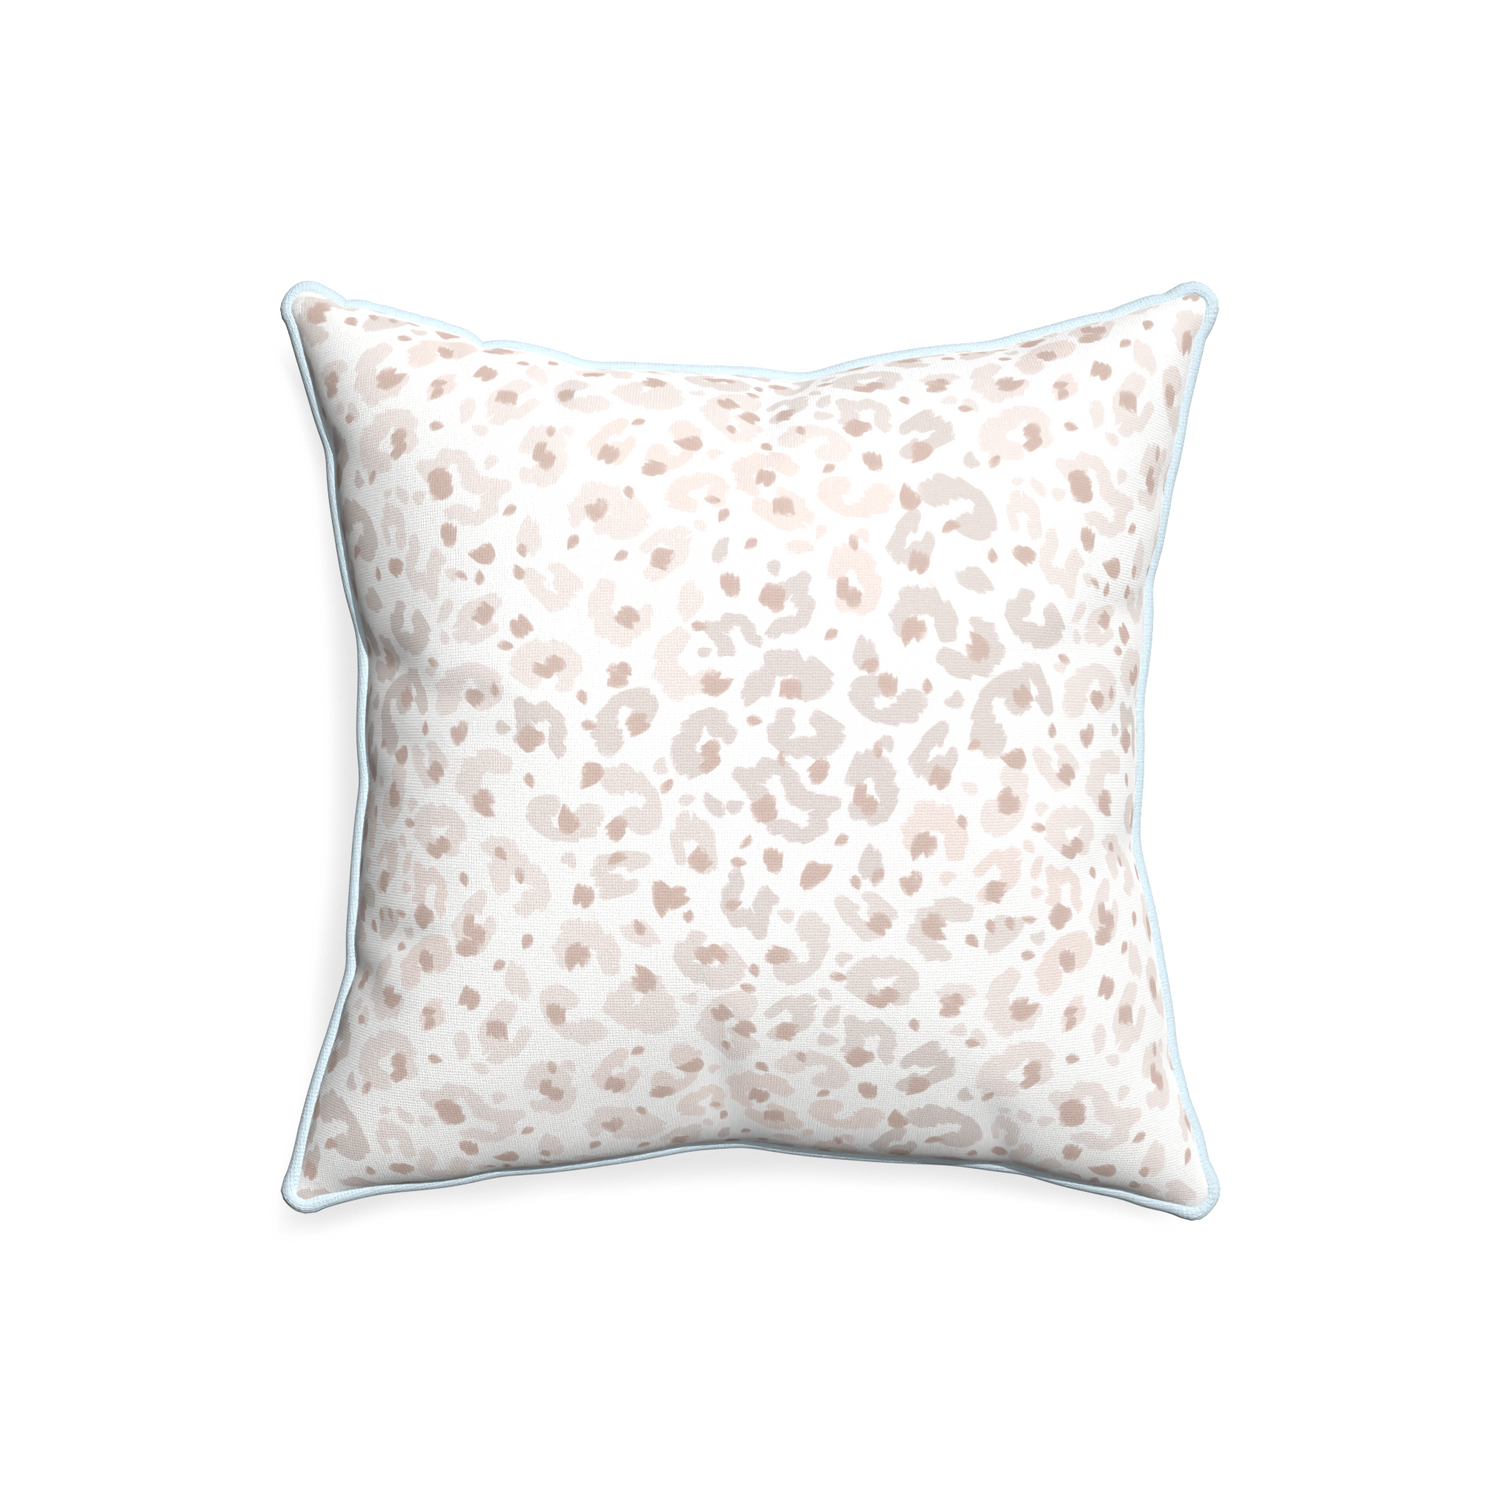 20-square rosie custom pillow with powder piping on white background